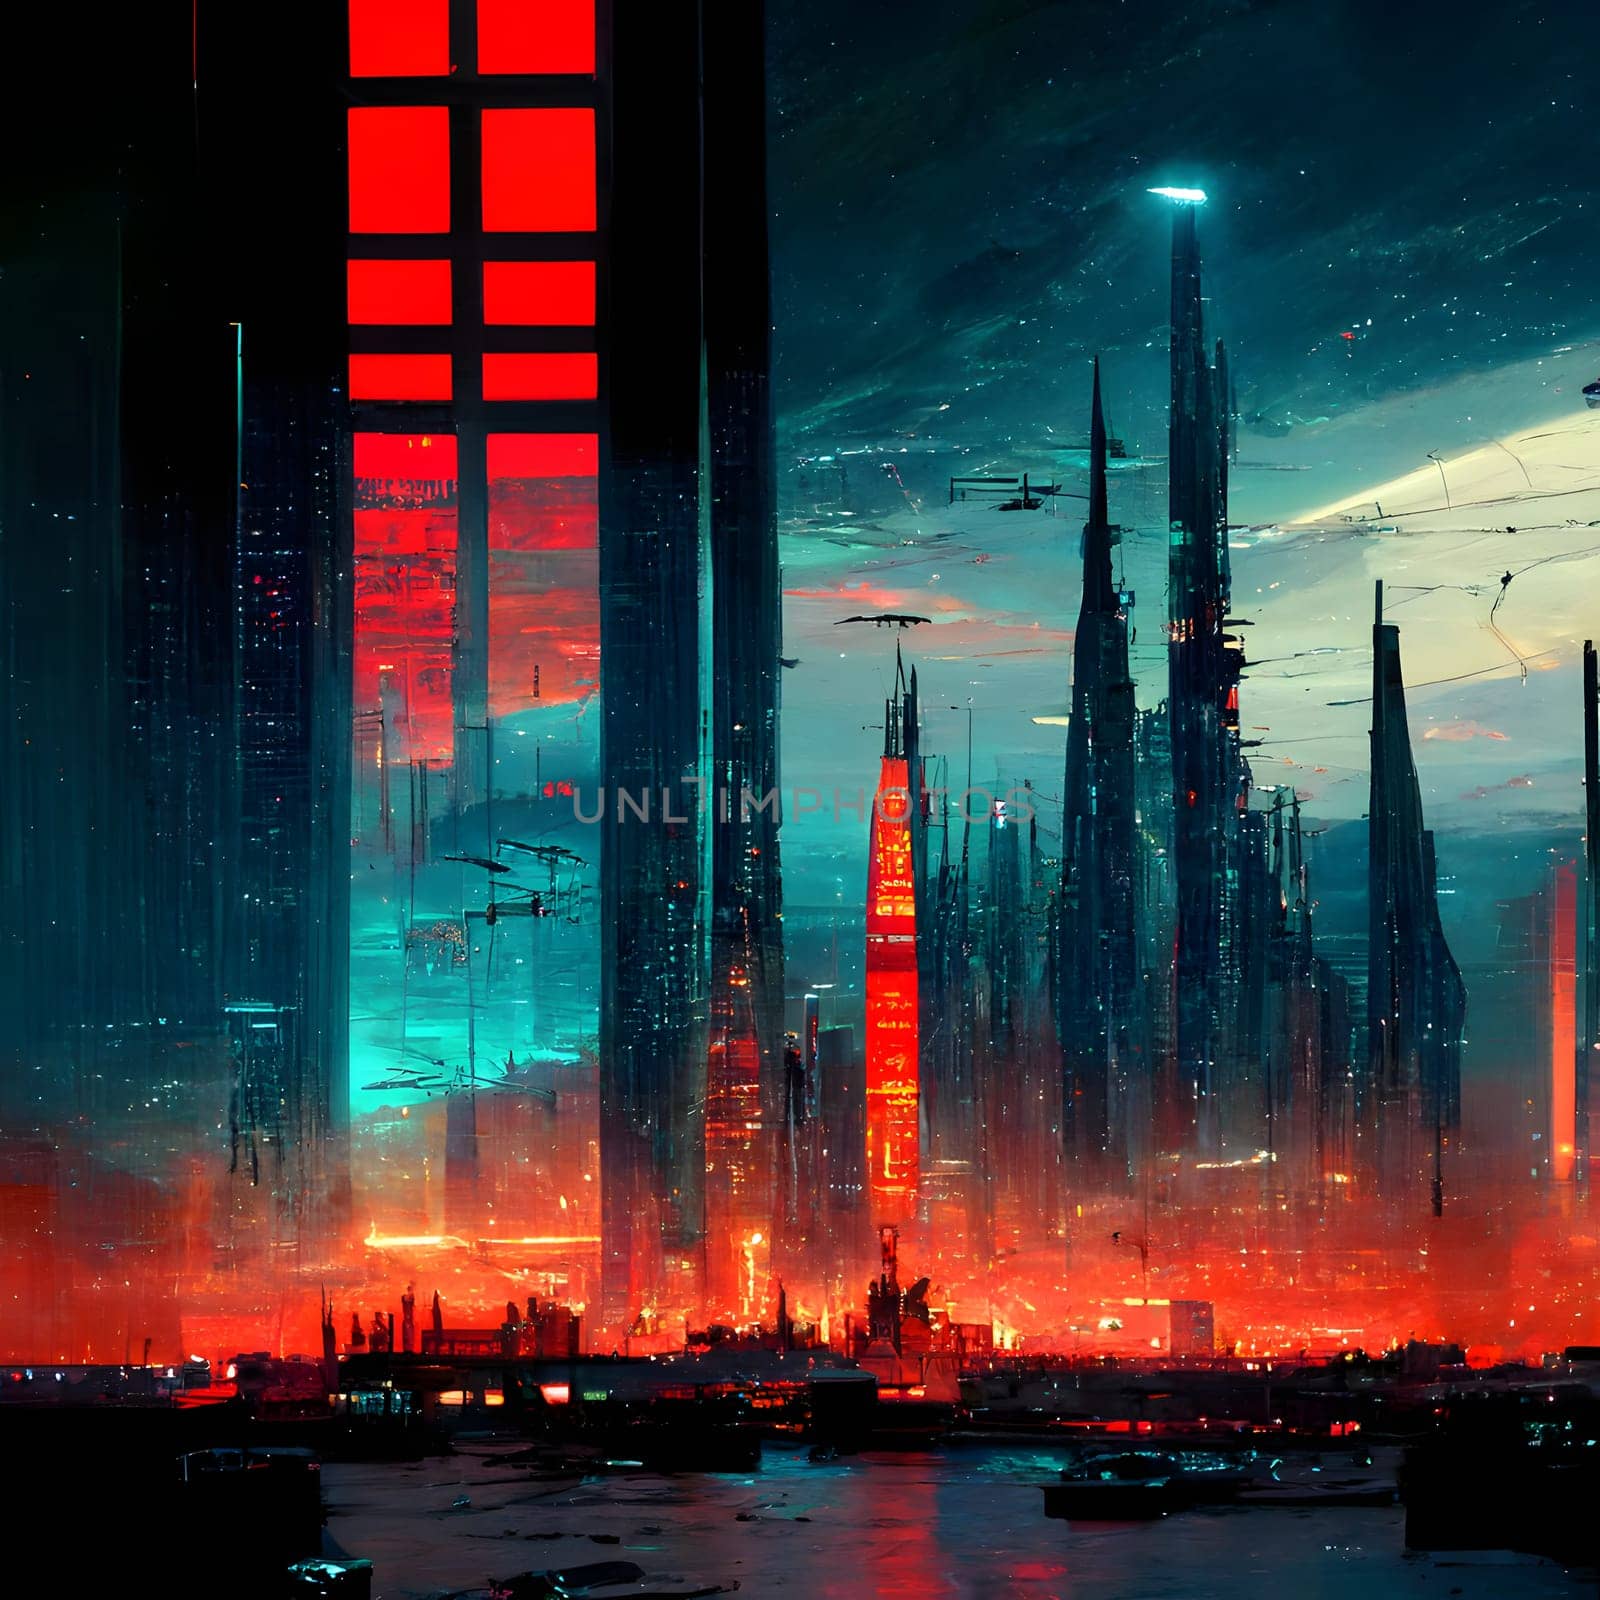 dystopian cyberpunk cityscape in red, cyan and black colors, neural network generated art by z1b